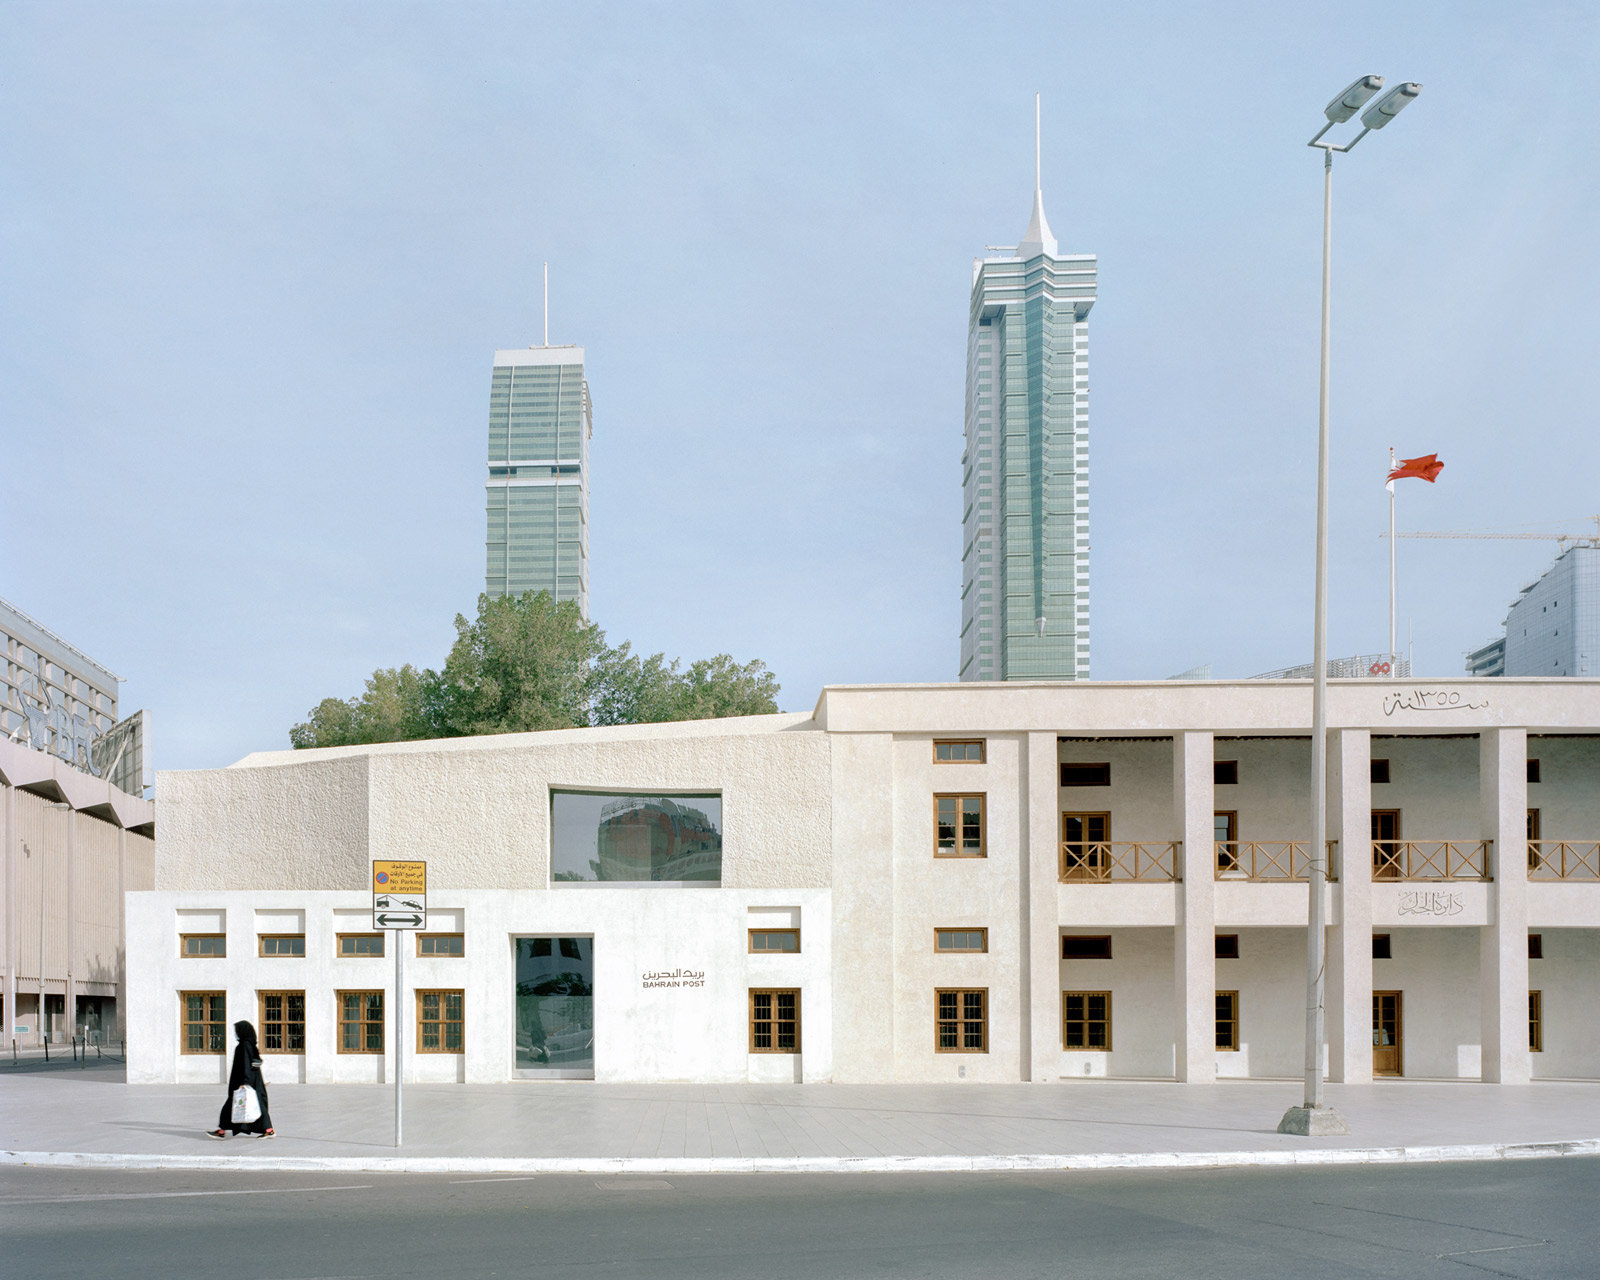 Image 16 of 20220802 AnneHoltrop Manama 2 in Manama post office - Cosentino